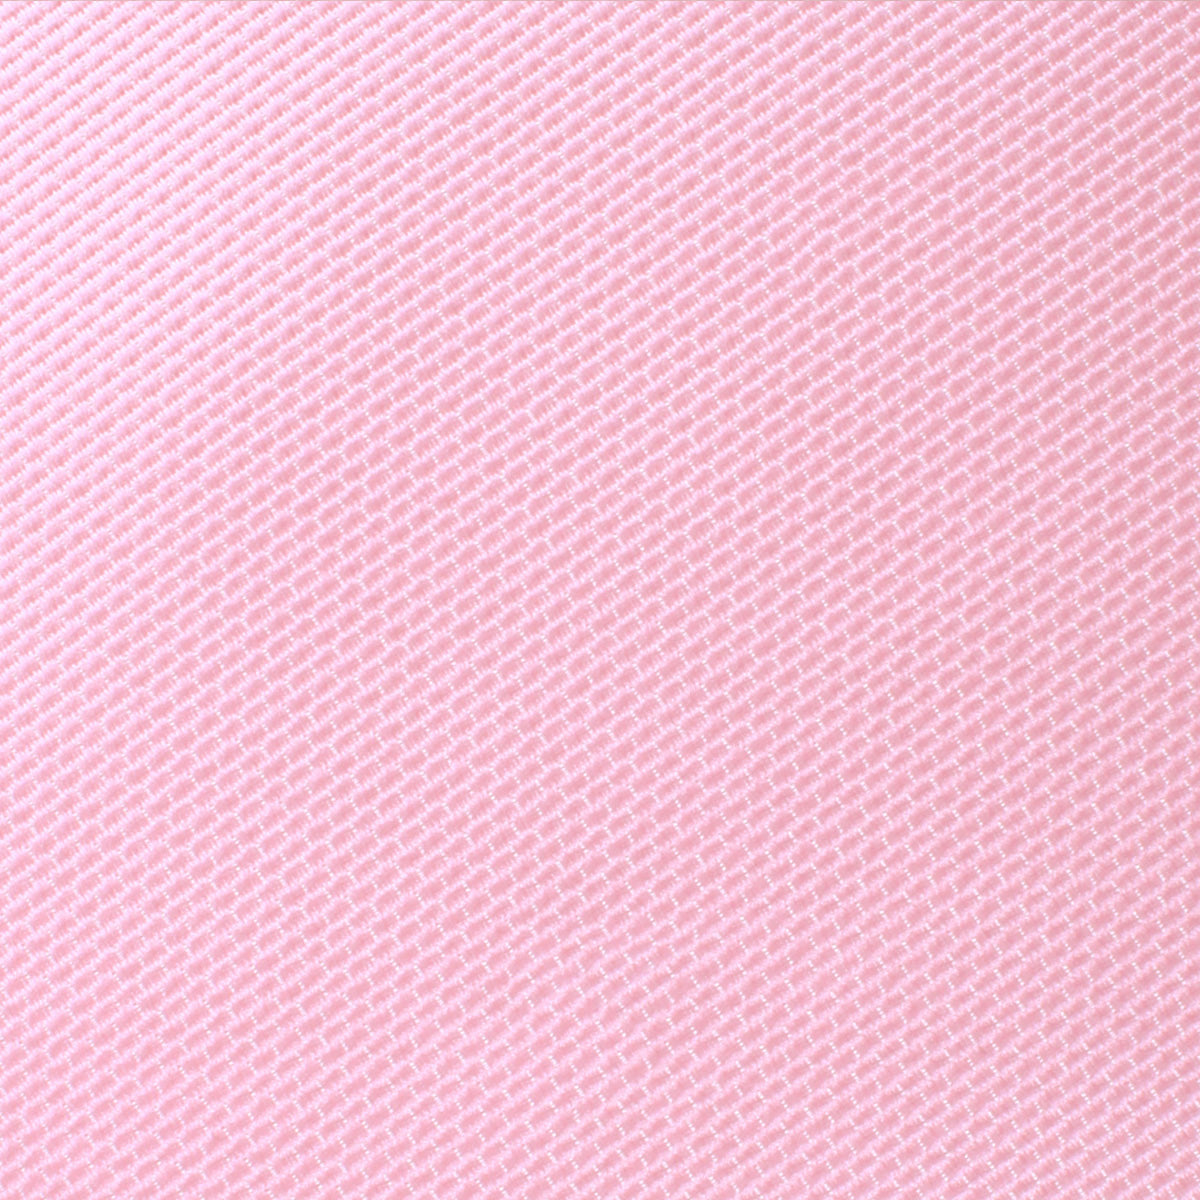 Tickled Pink Weave Bow Tie Fabric